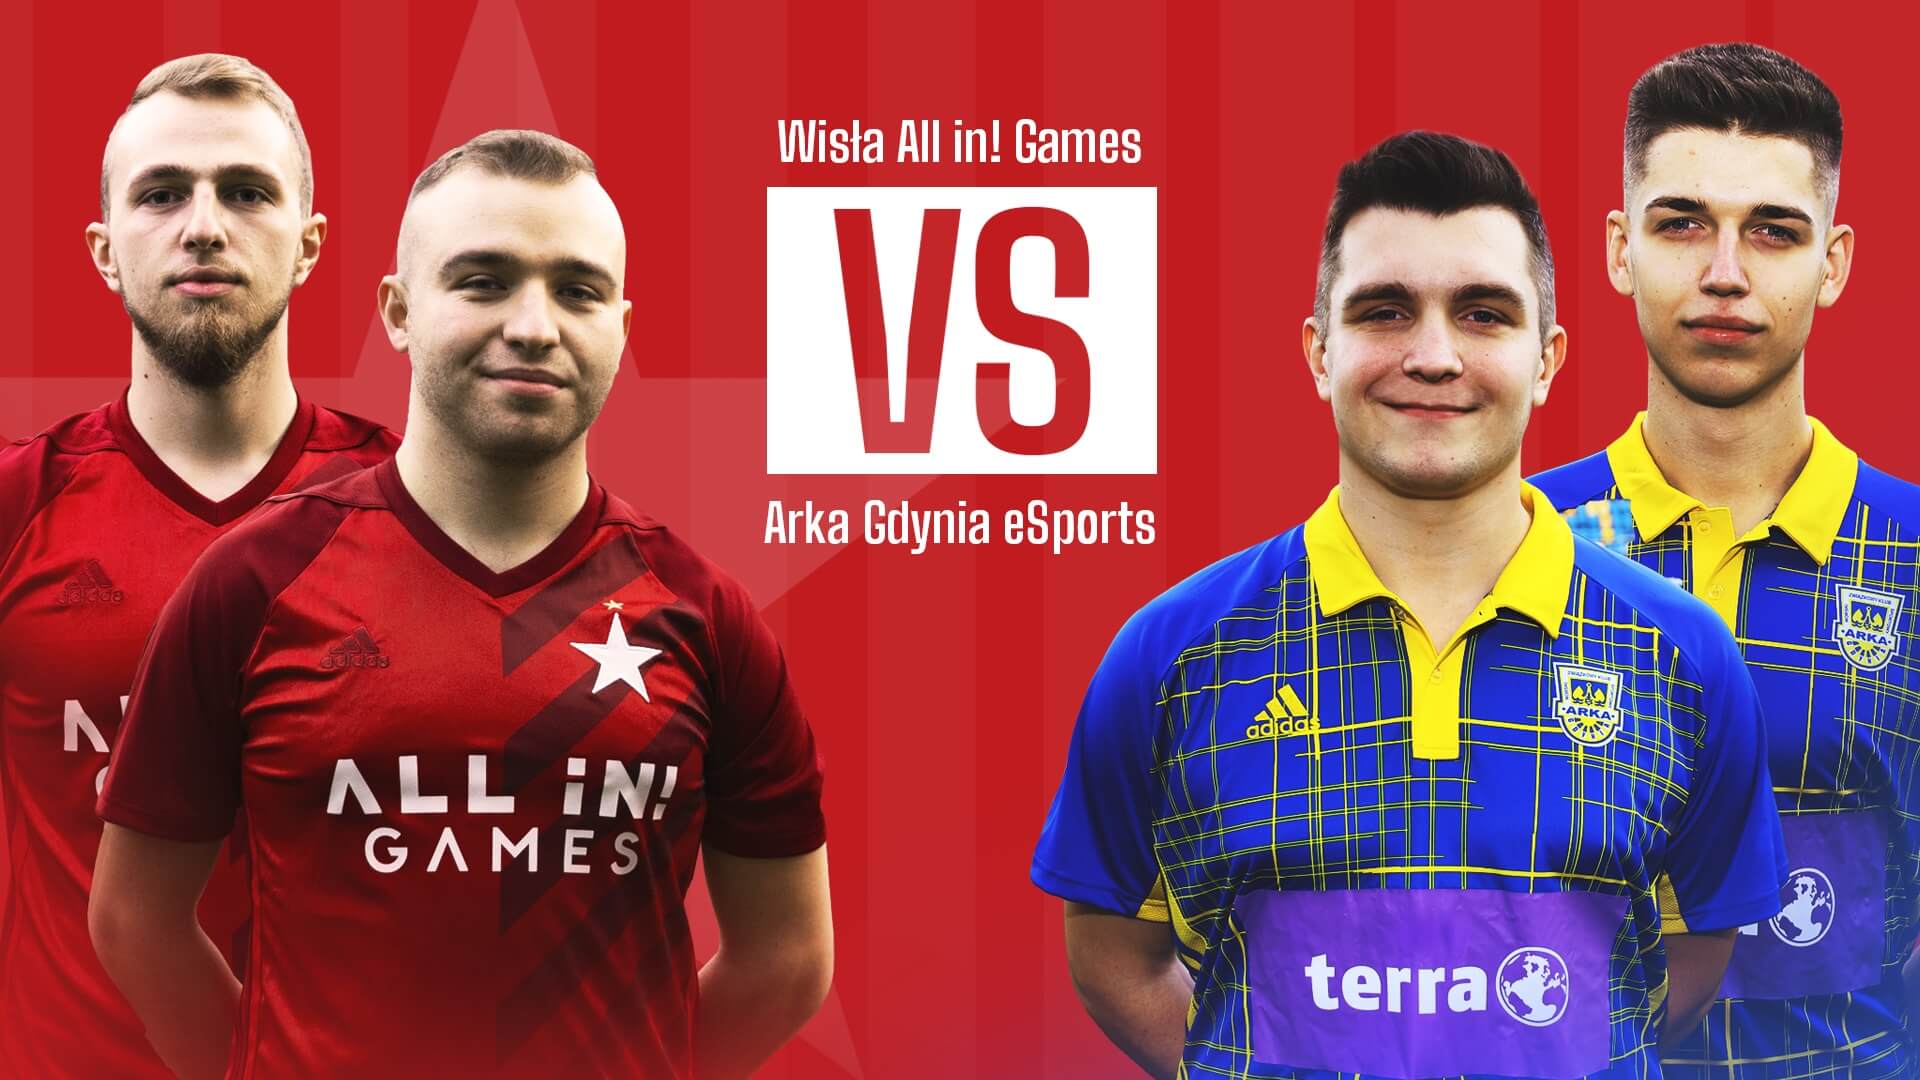 Wisła All in! Games